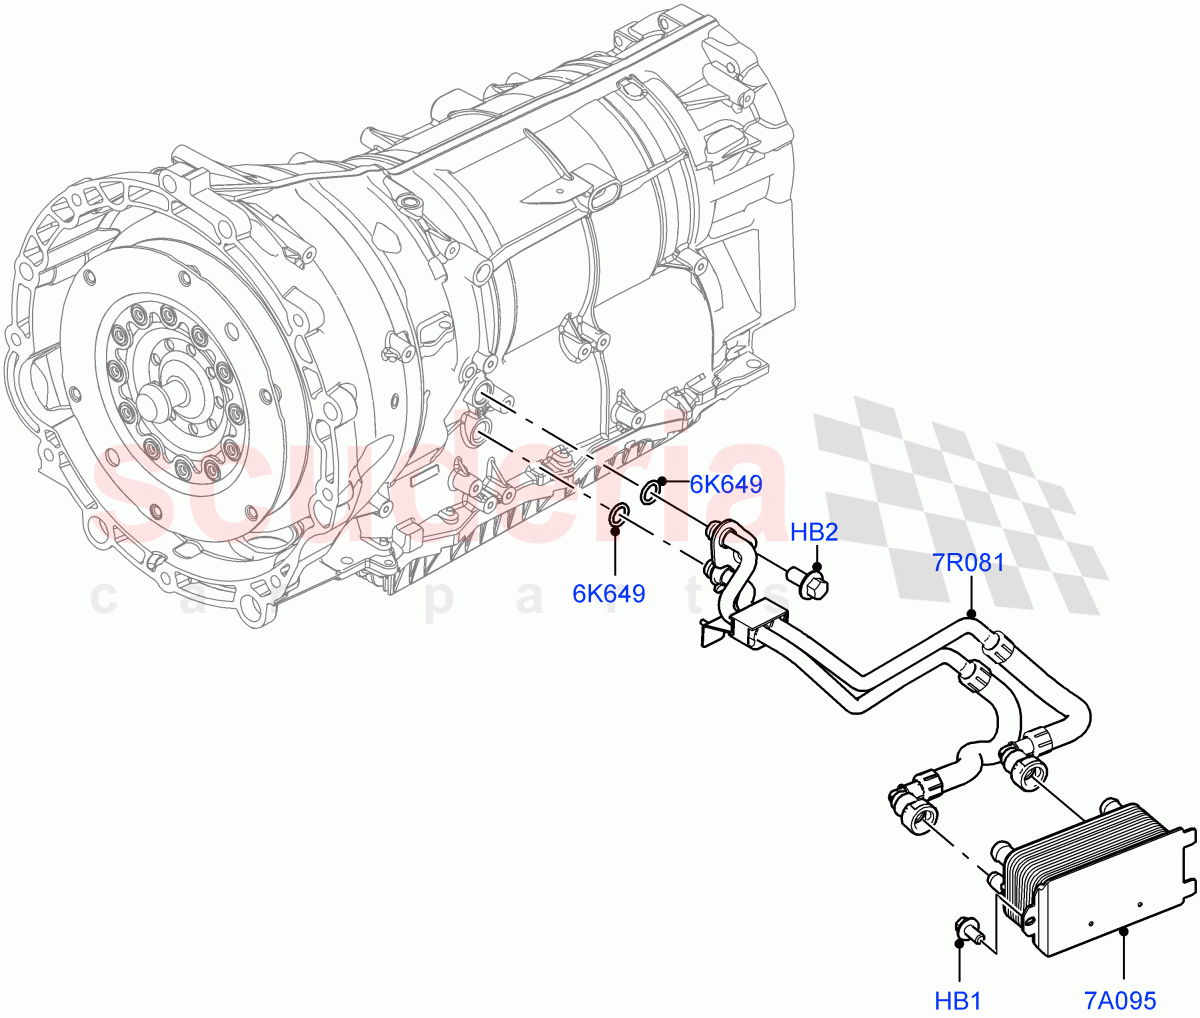 Transmission Cooling Systems(3.0L AJ20P6 Petrol High,8 Speed Auto Trans ZF 8HP76,3.0L AJ20D6 Diesel High)((V)FROMKA000001) of Land Rover Land Rover Range Rover (2012-2021) [3.0 Diesel 24V DOHC TC]